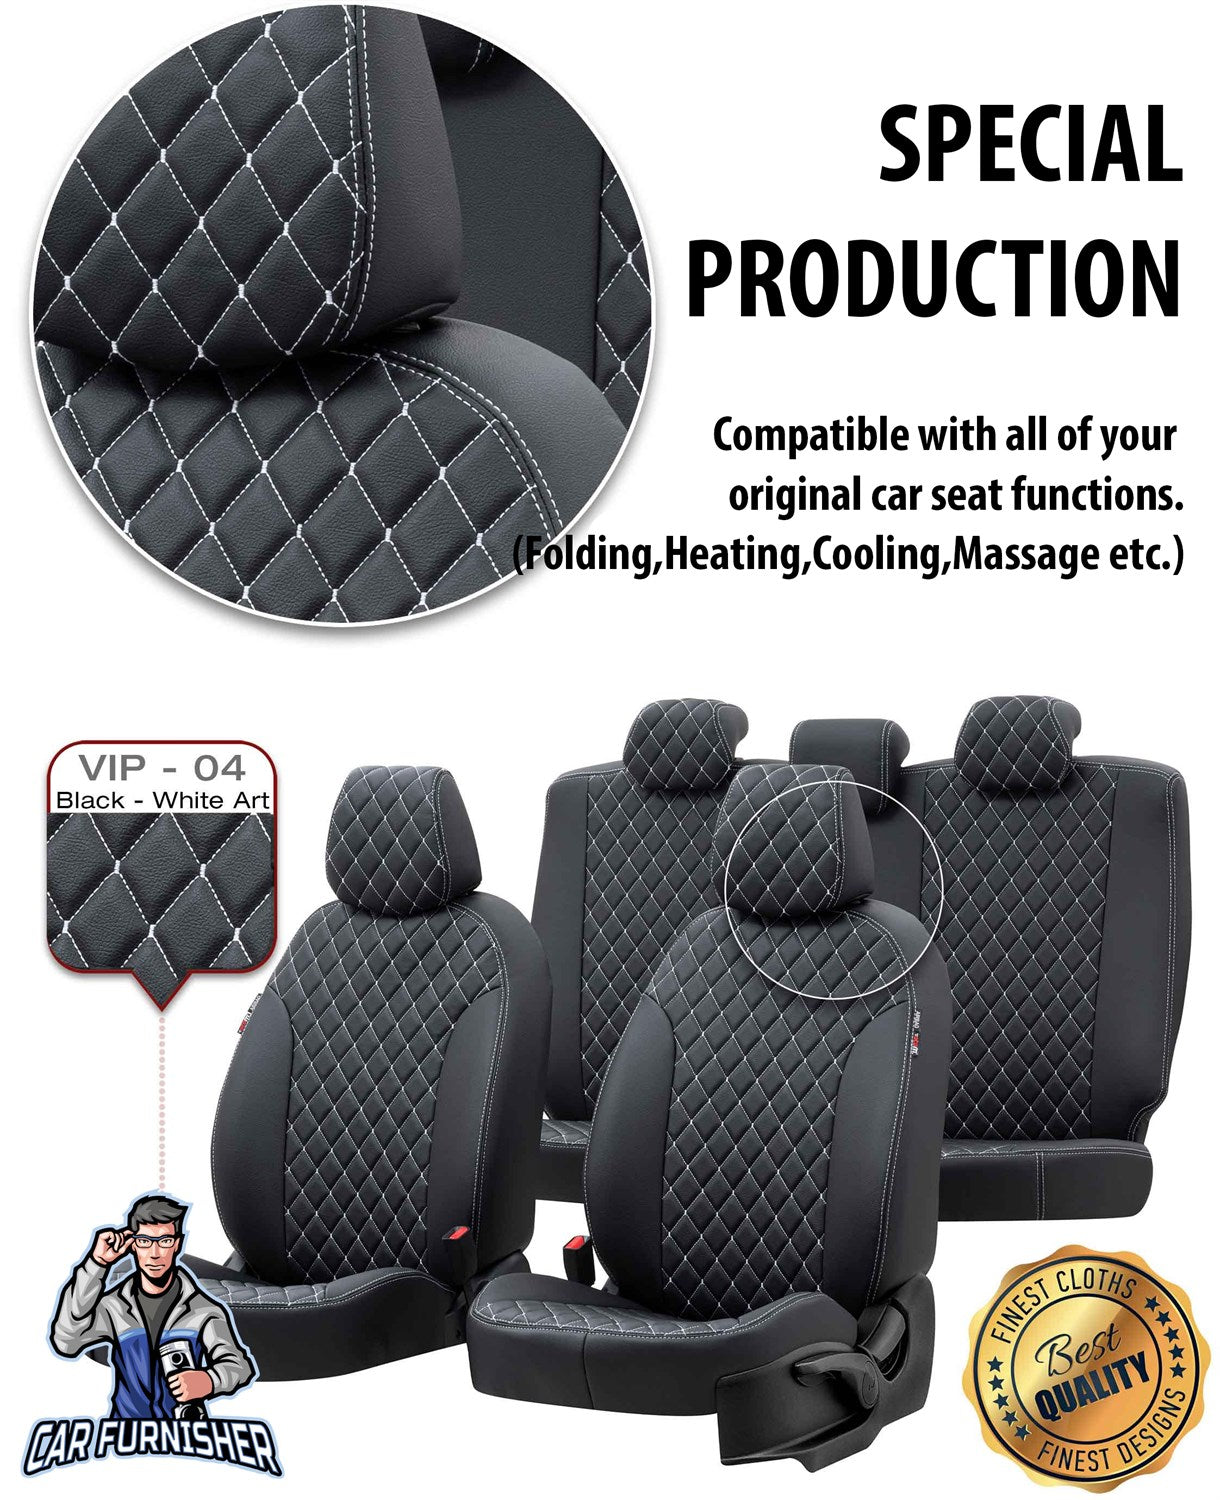 Peugeot 307 Seat Covers Madrid Leather Design Dark Gray Leather